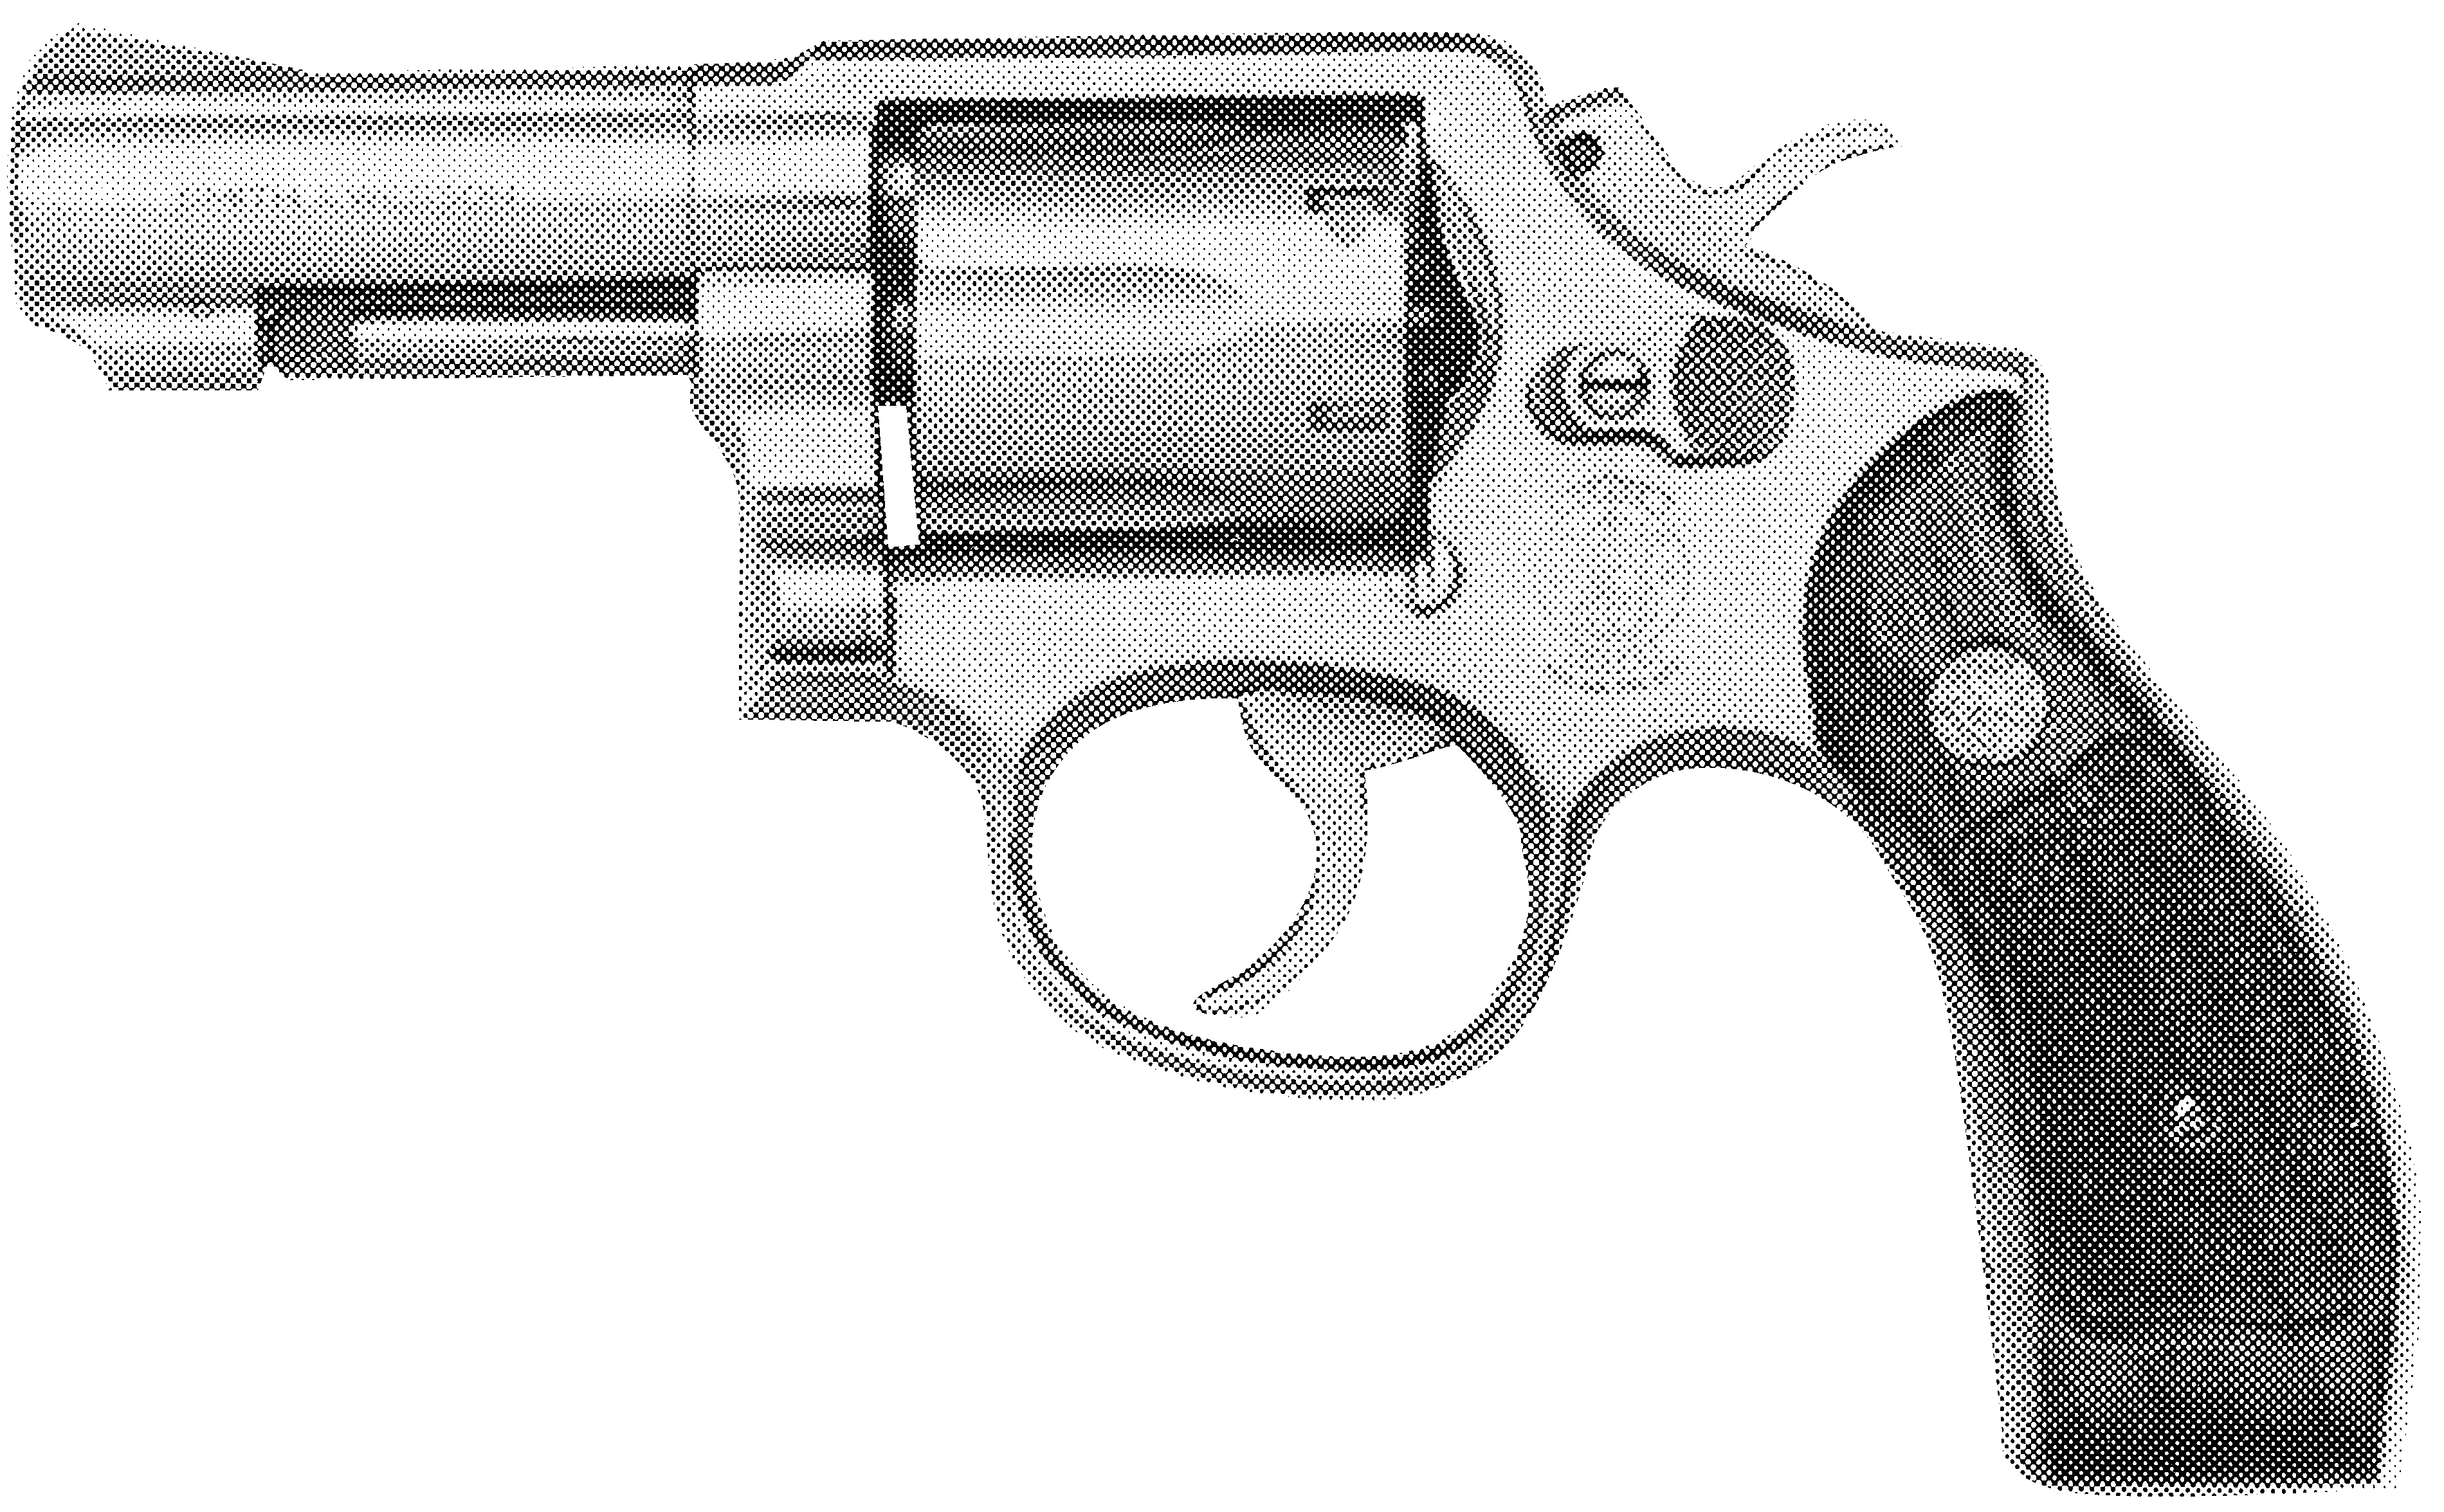 Model 65 (.357 Military & Police Heavy Barrel Stainless)